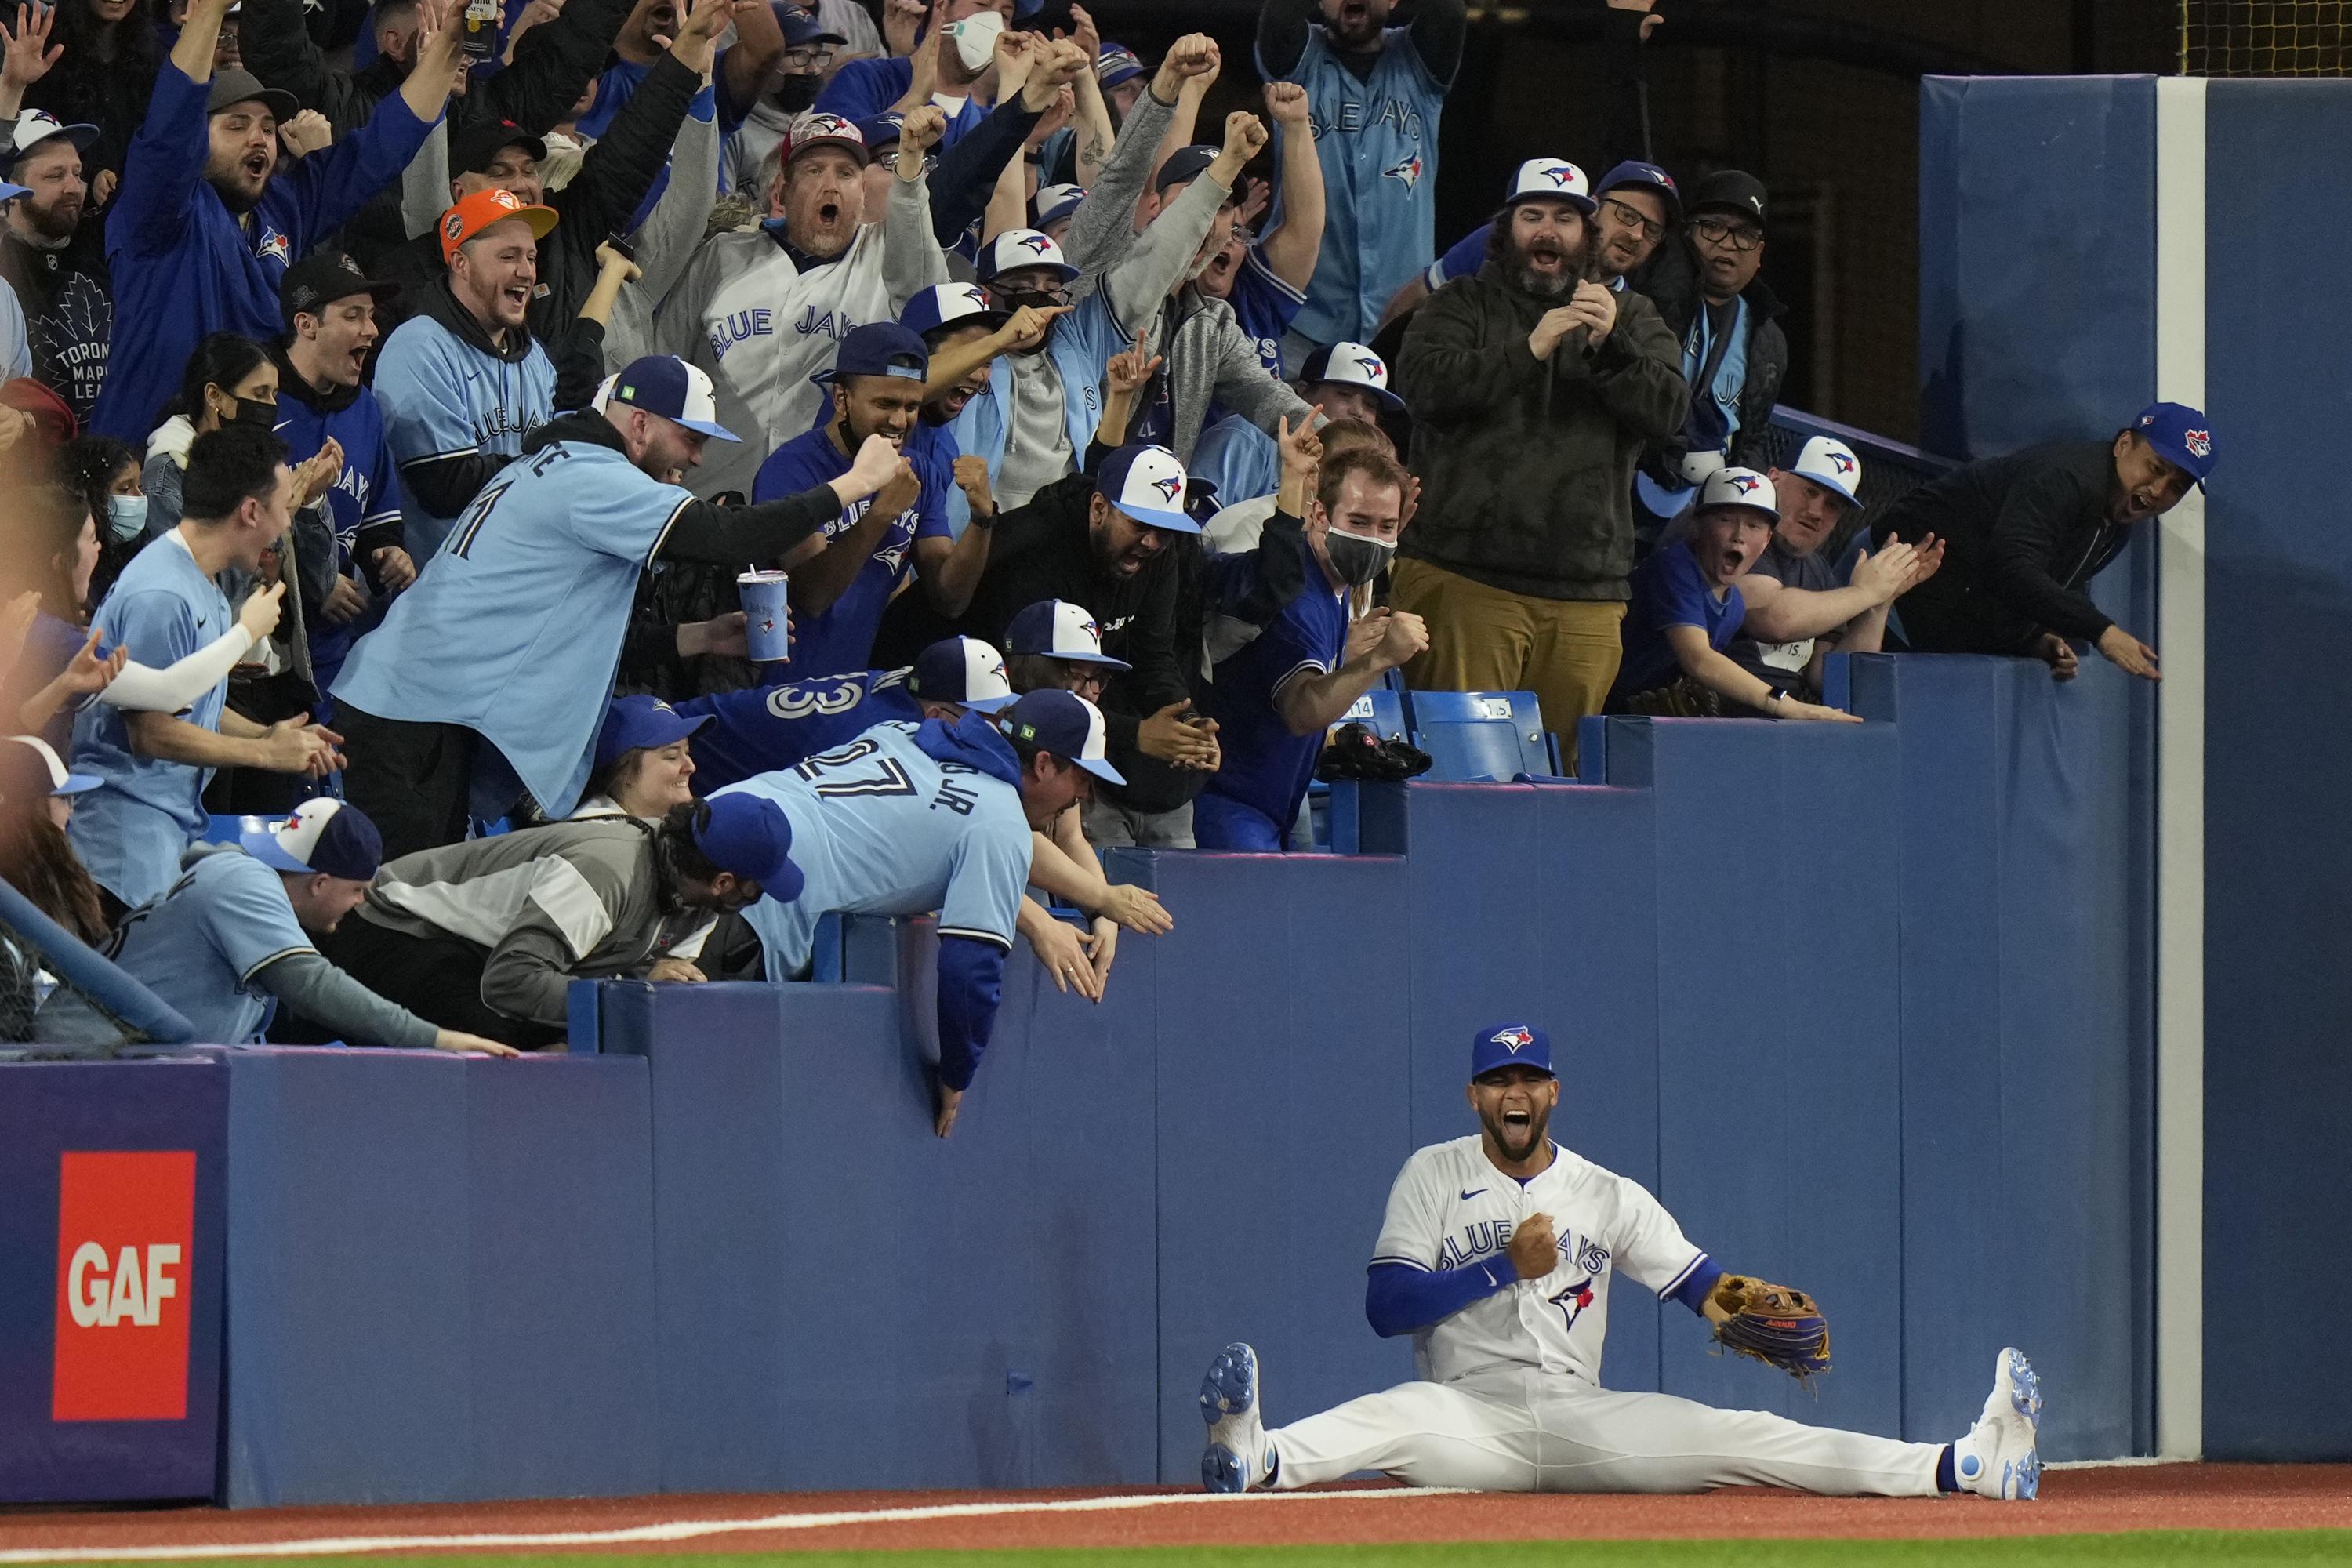 Jays rally from 7 down for season-opening win over Rangers